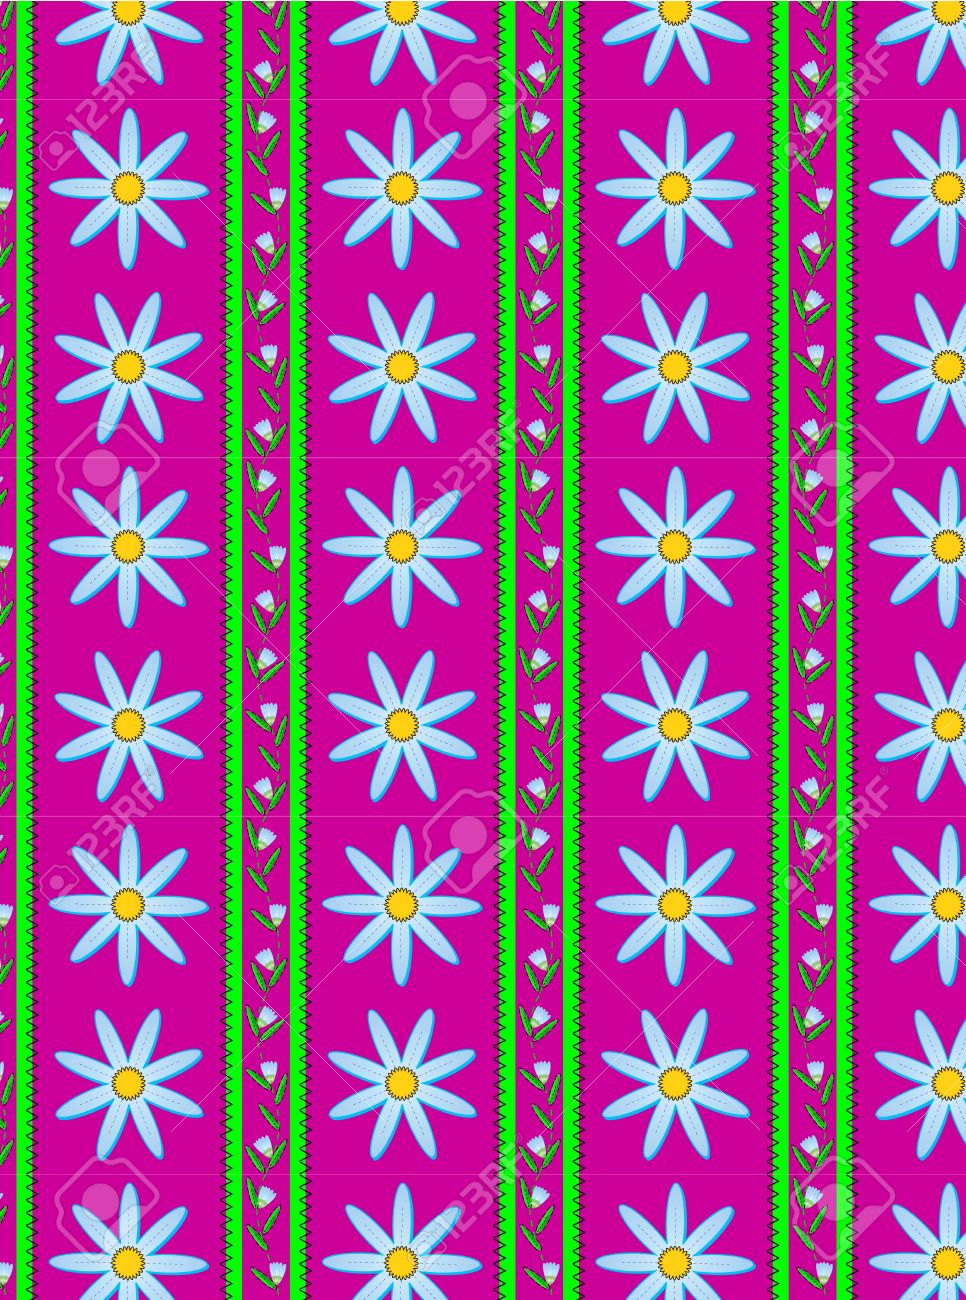 Swatch Pink Striped Wallpaper Background With Blue Flowers Bud